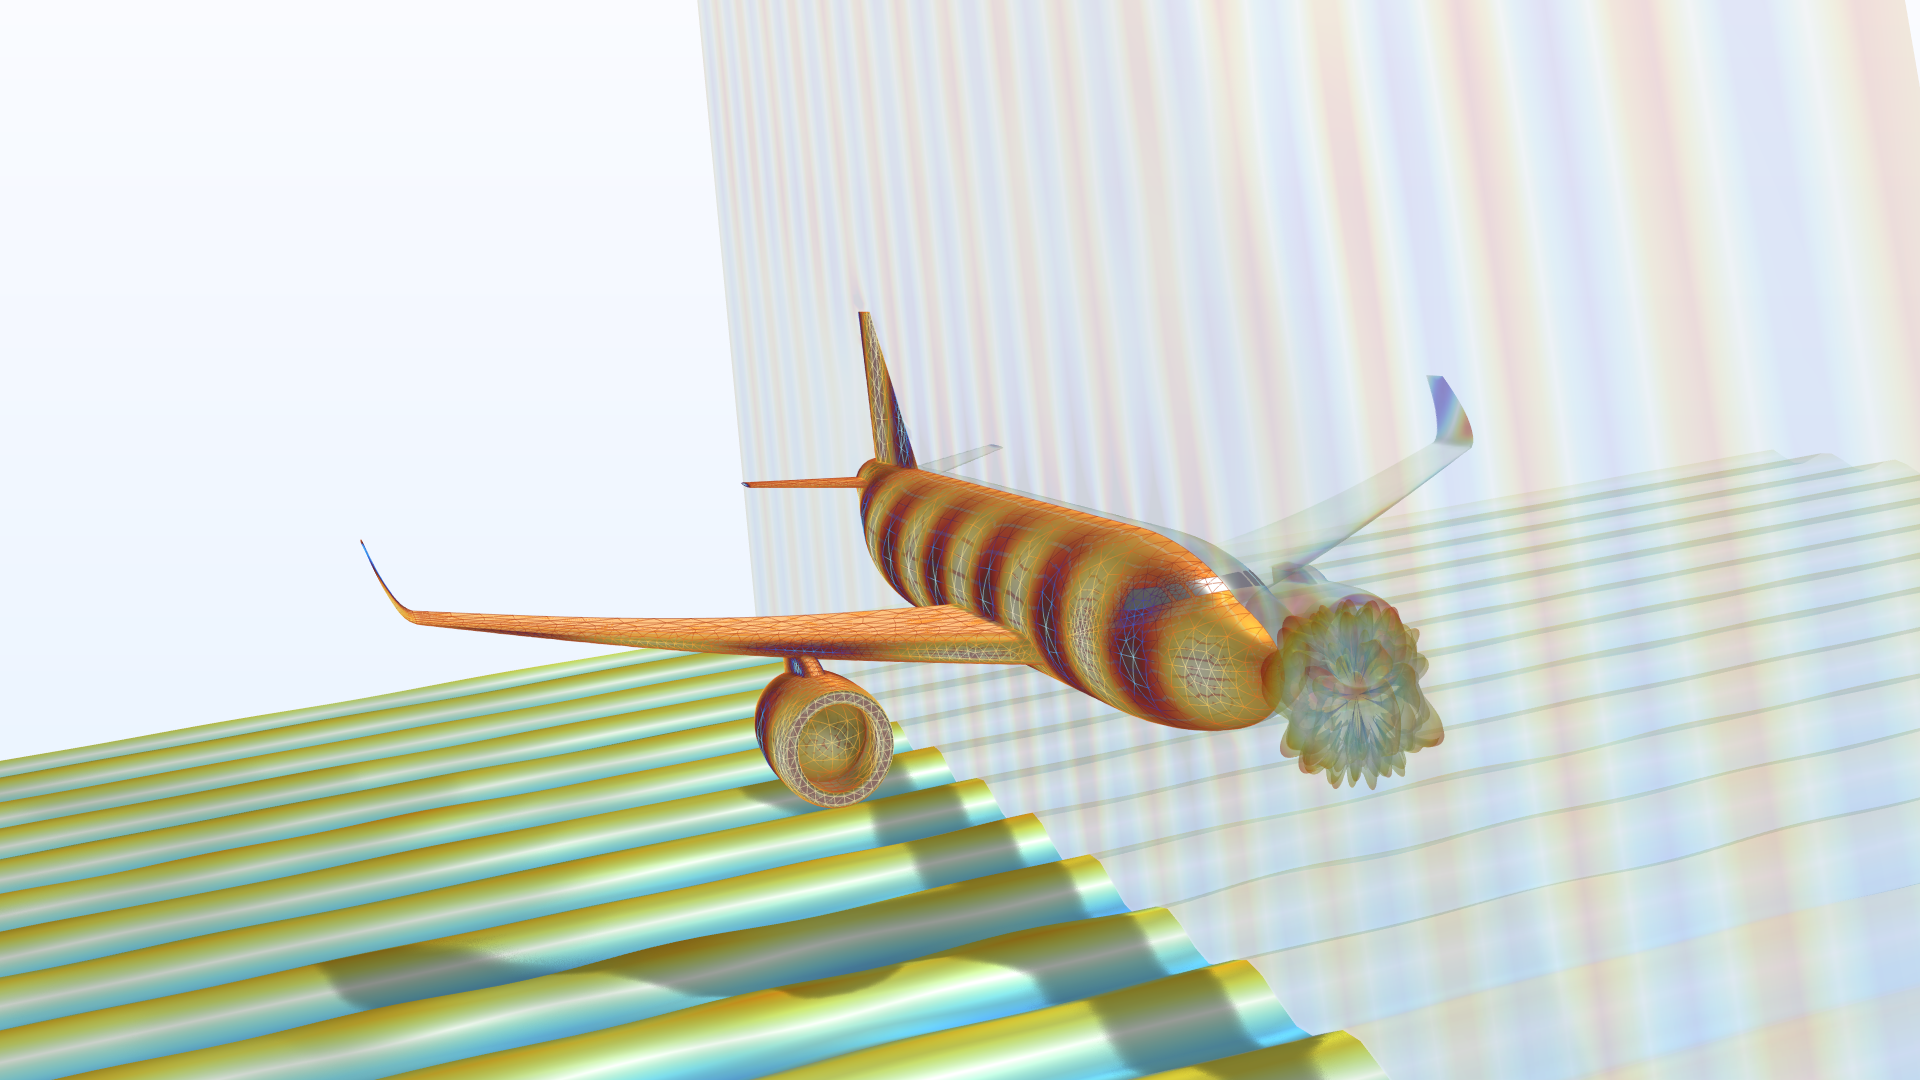 title="" alt="A model of an airplane showing the radar cross section in the Thermal Wave color table."